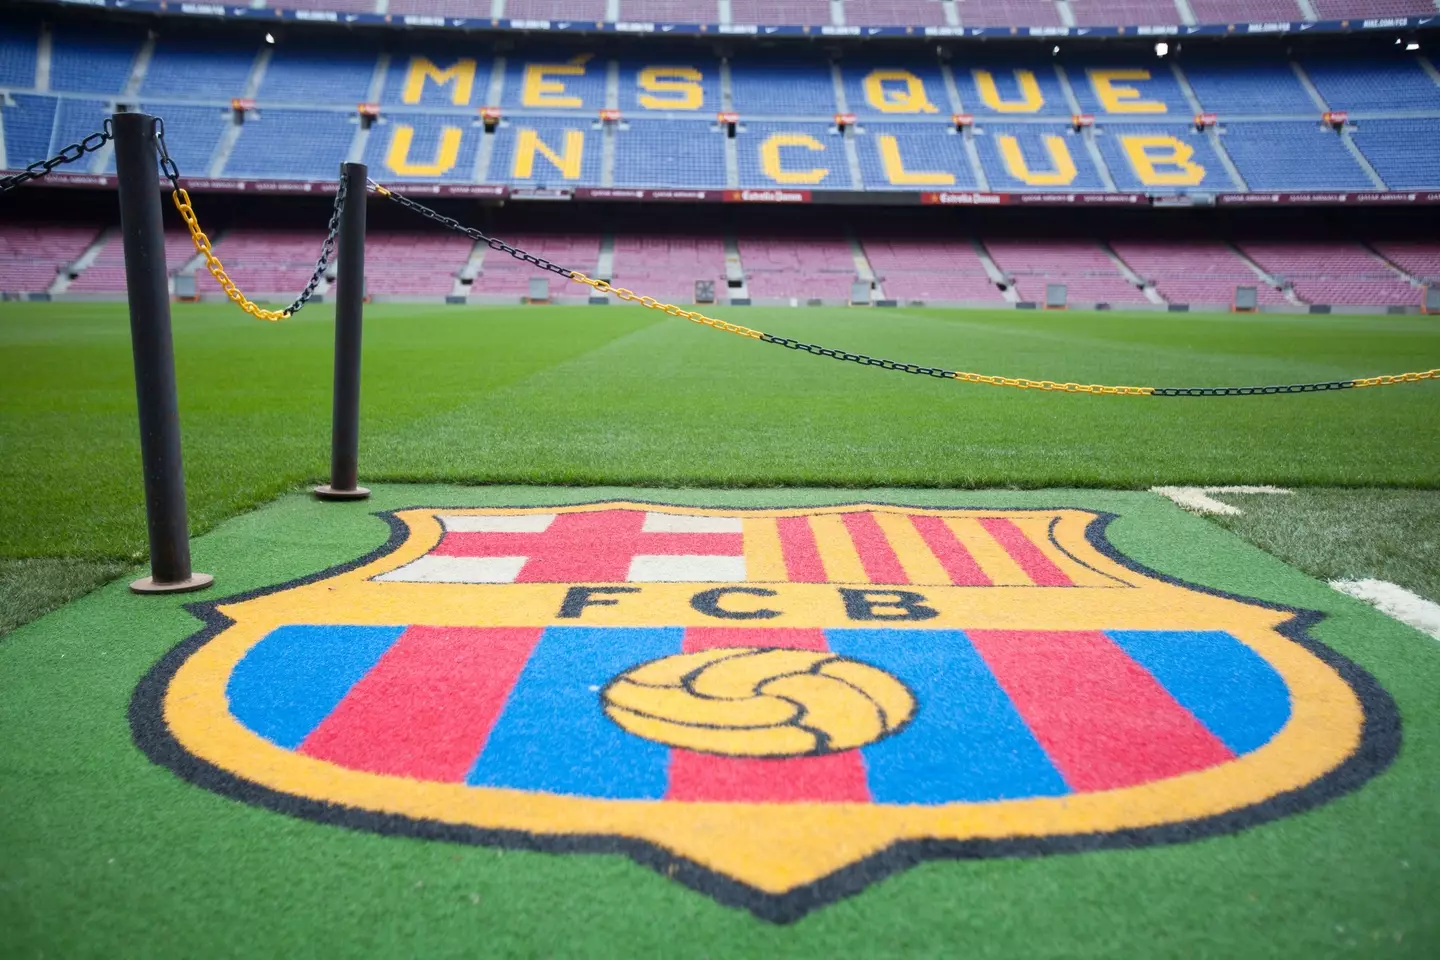 Barcelona were due to host Roma at the Nou Camp on August 6 (Image: Alamy)